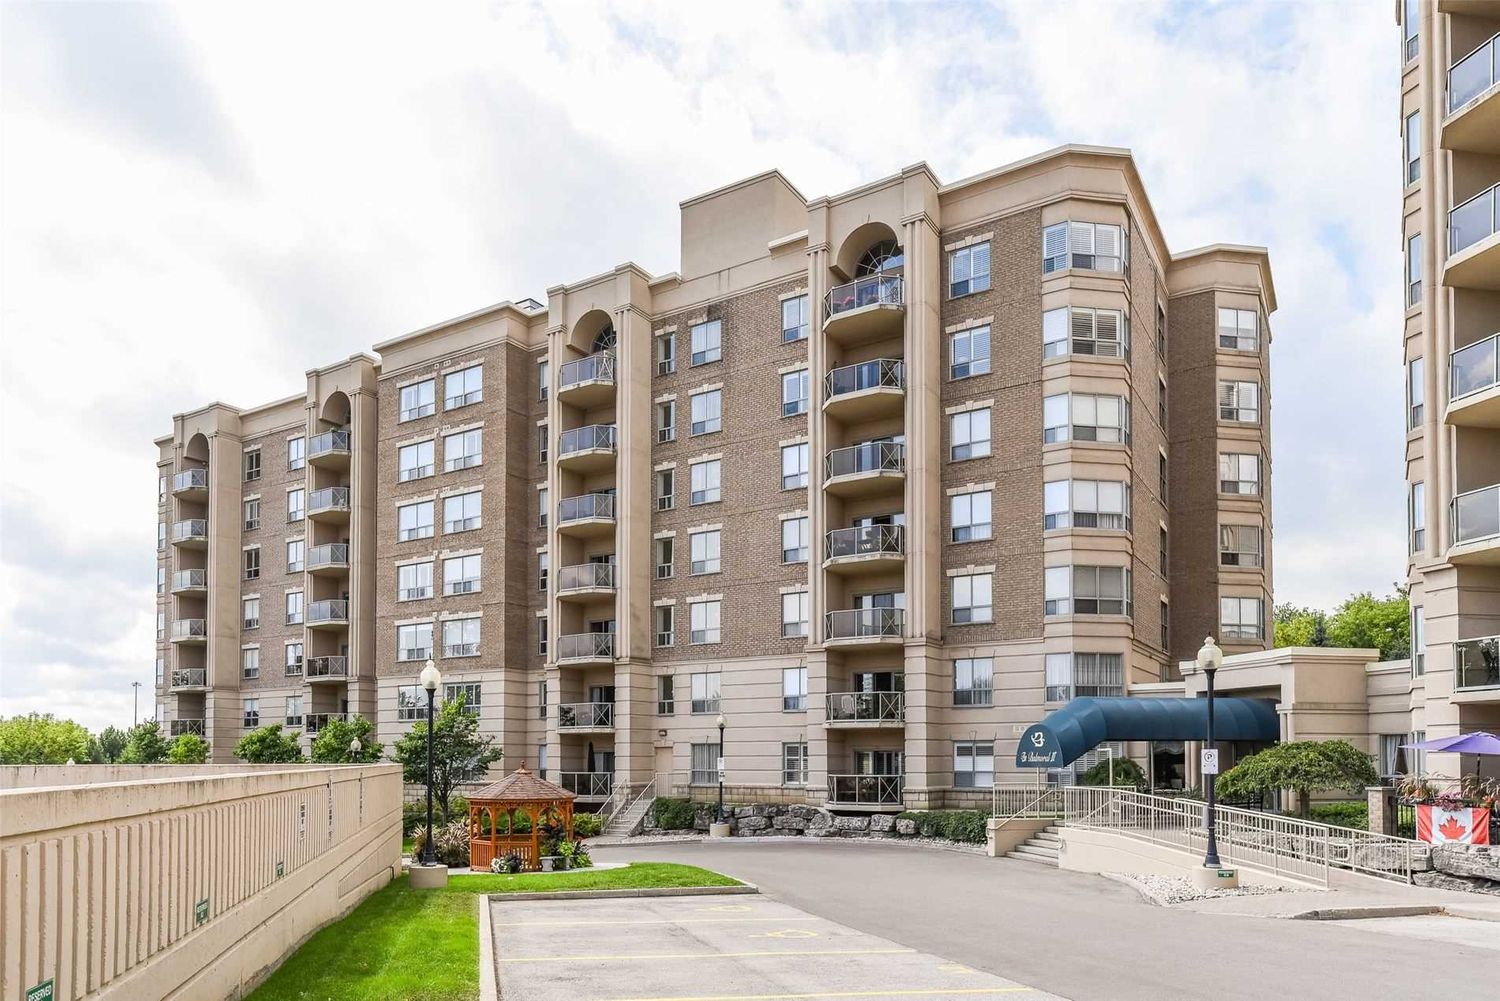 2085 Amherst Heights Drive. Balmoral II Condos is located in  Burlington, Toronto - image #2 of 2